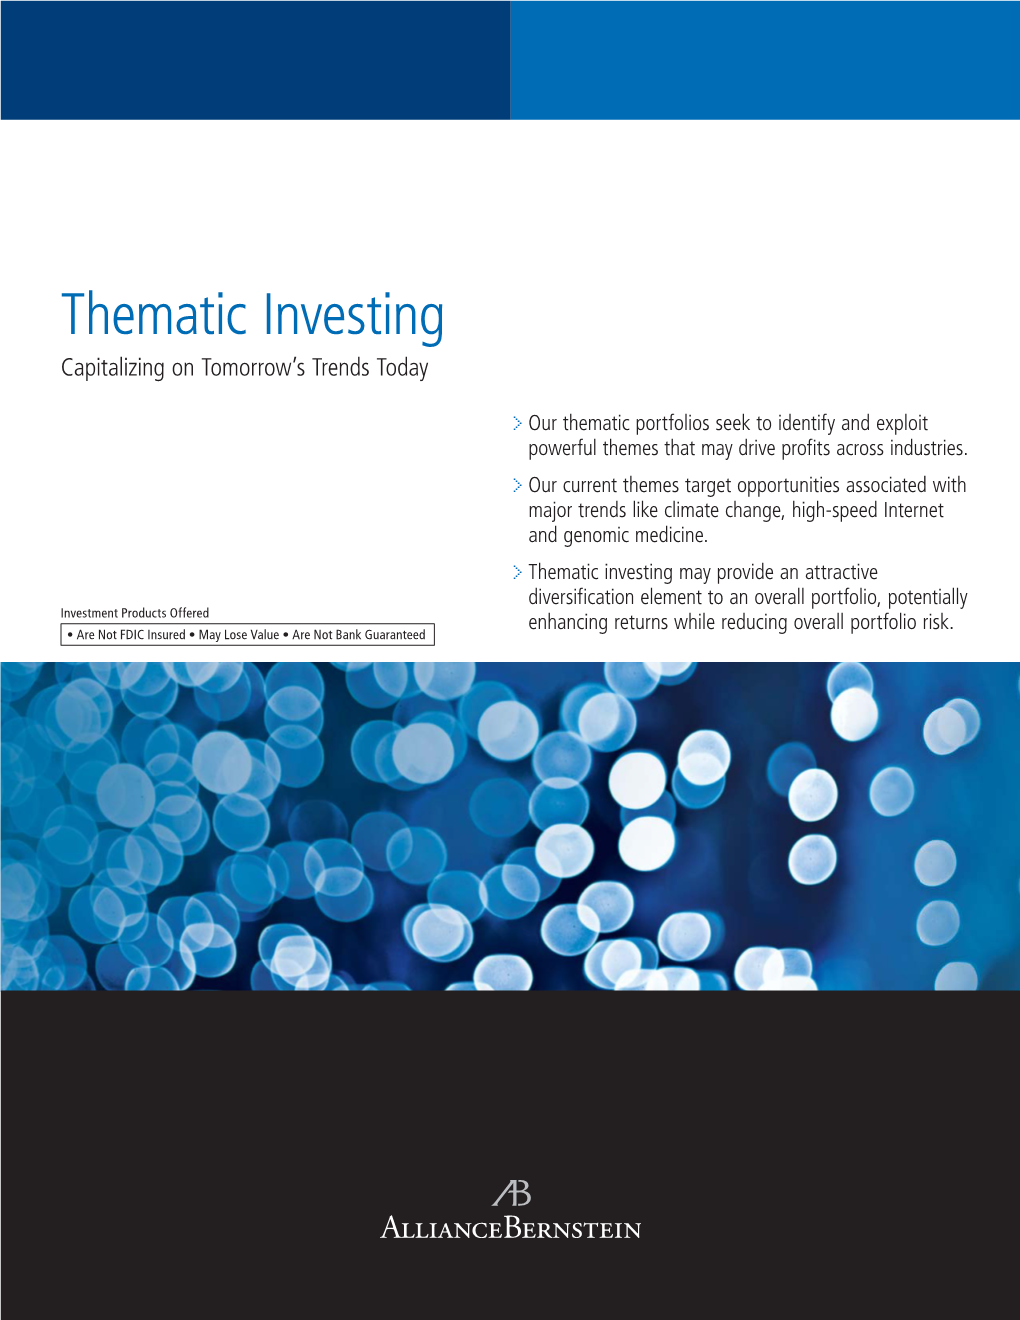 Thematic Investing Brochure